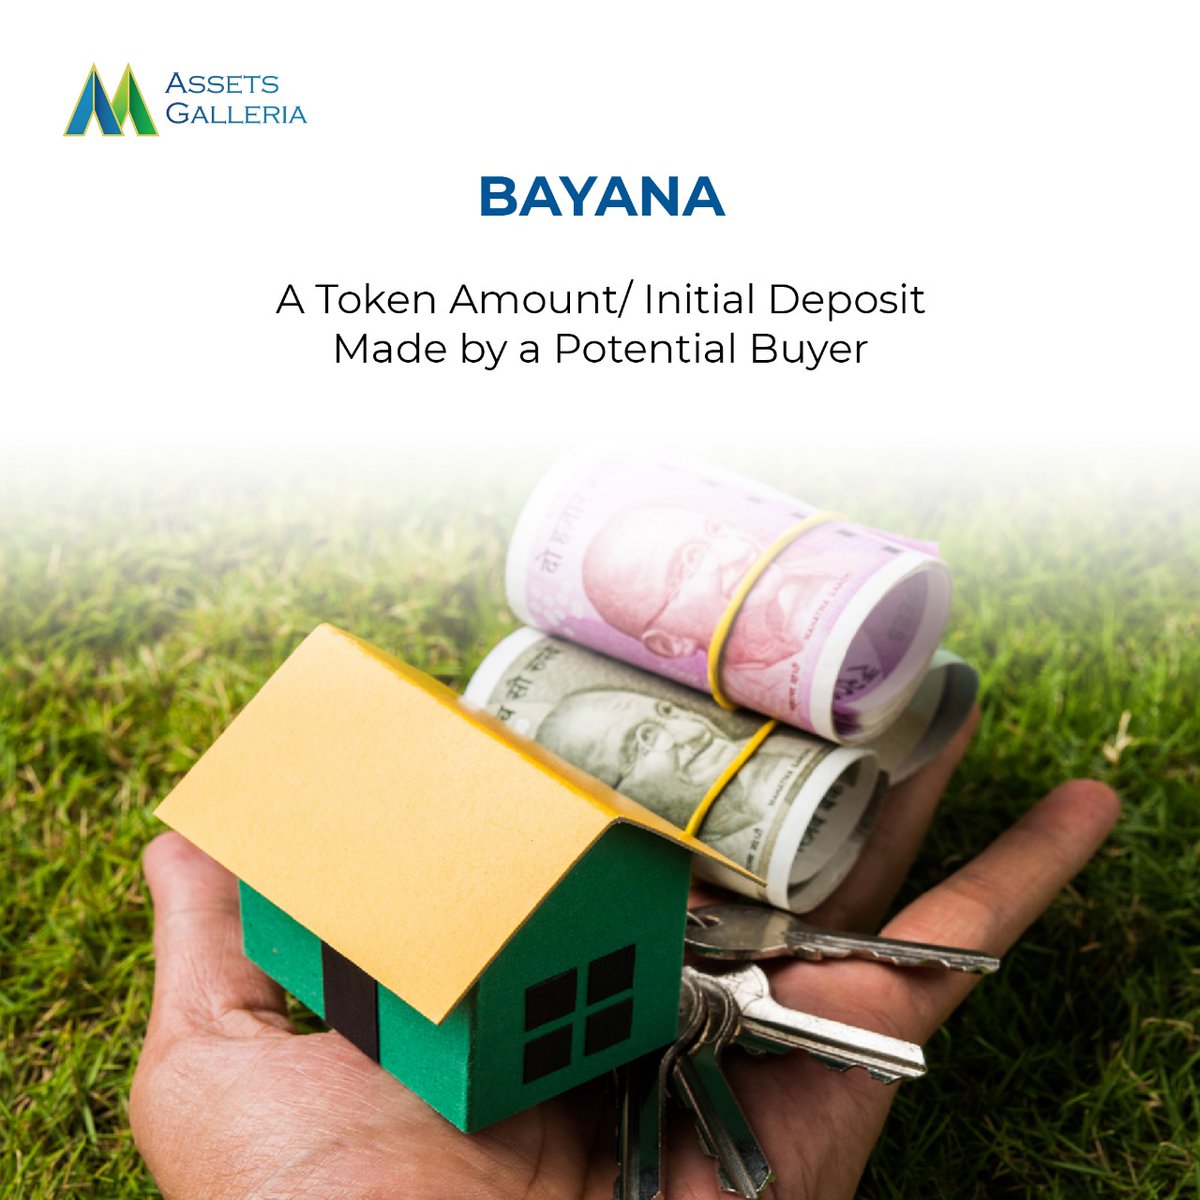 #Bayana

A #TokenAmount / #InitialDeposit Made by a Potential #Buyer

#AssetsGalleria